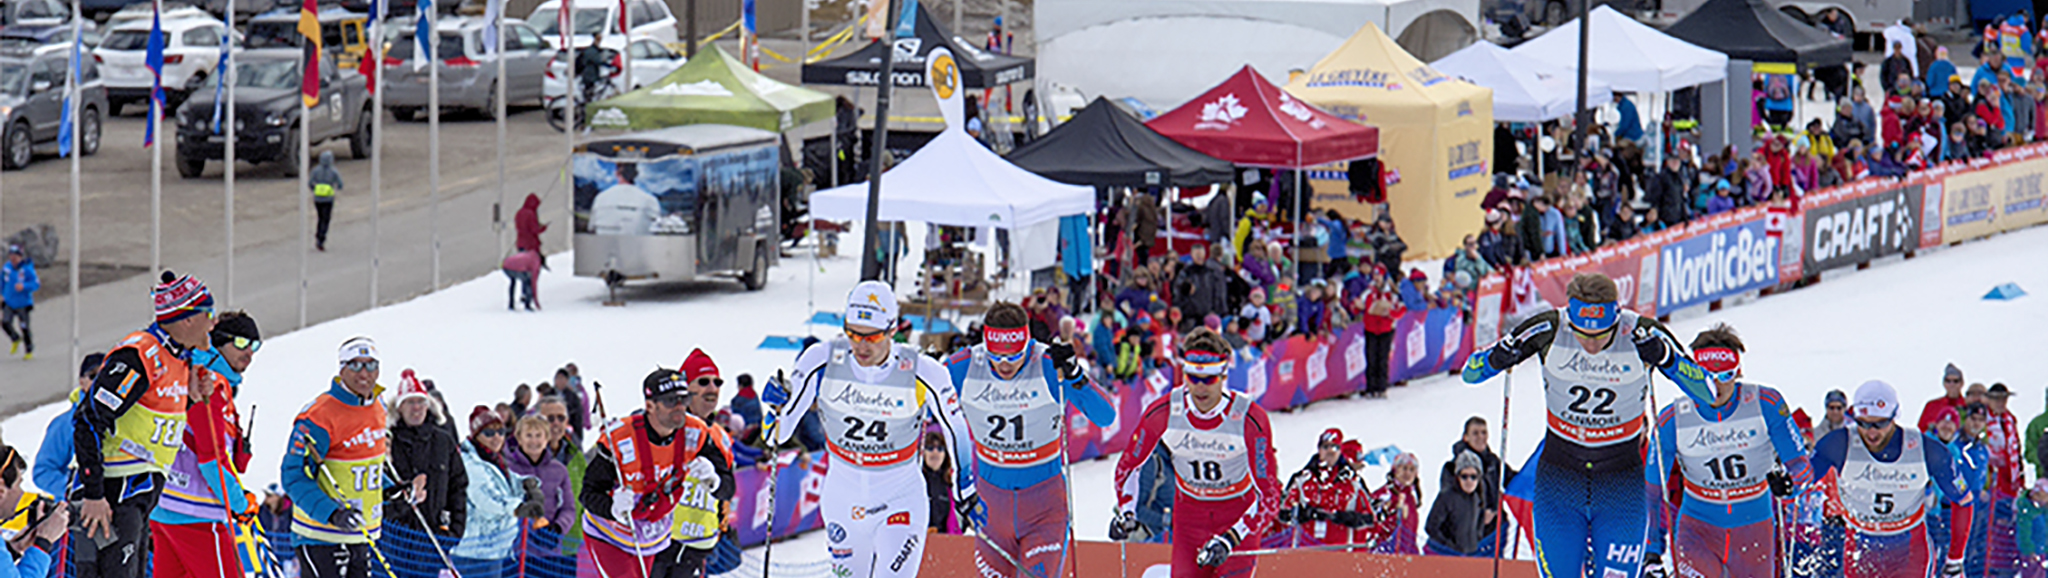 Alberta World Cup Canmore Nordic Market